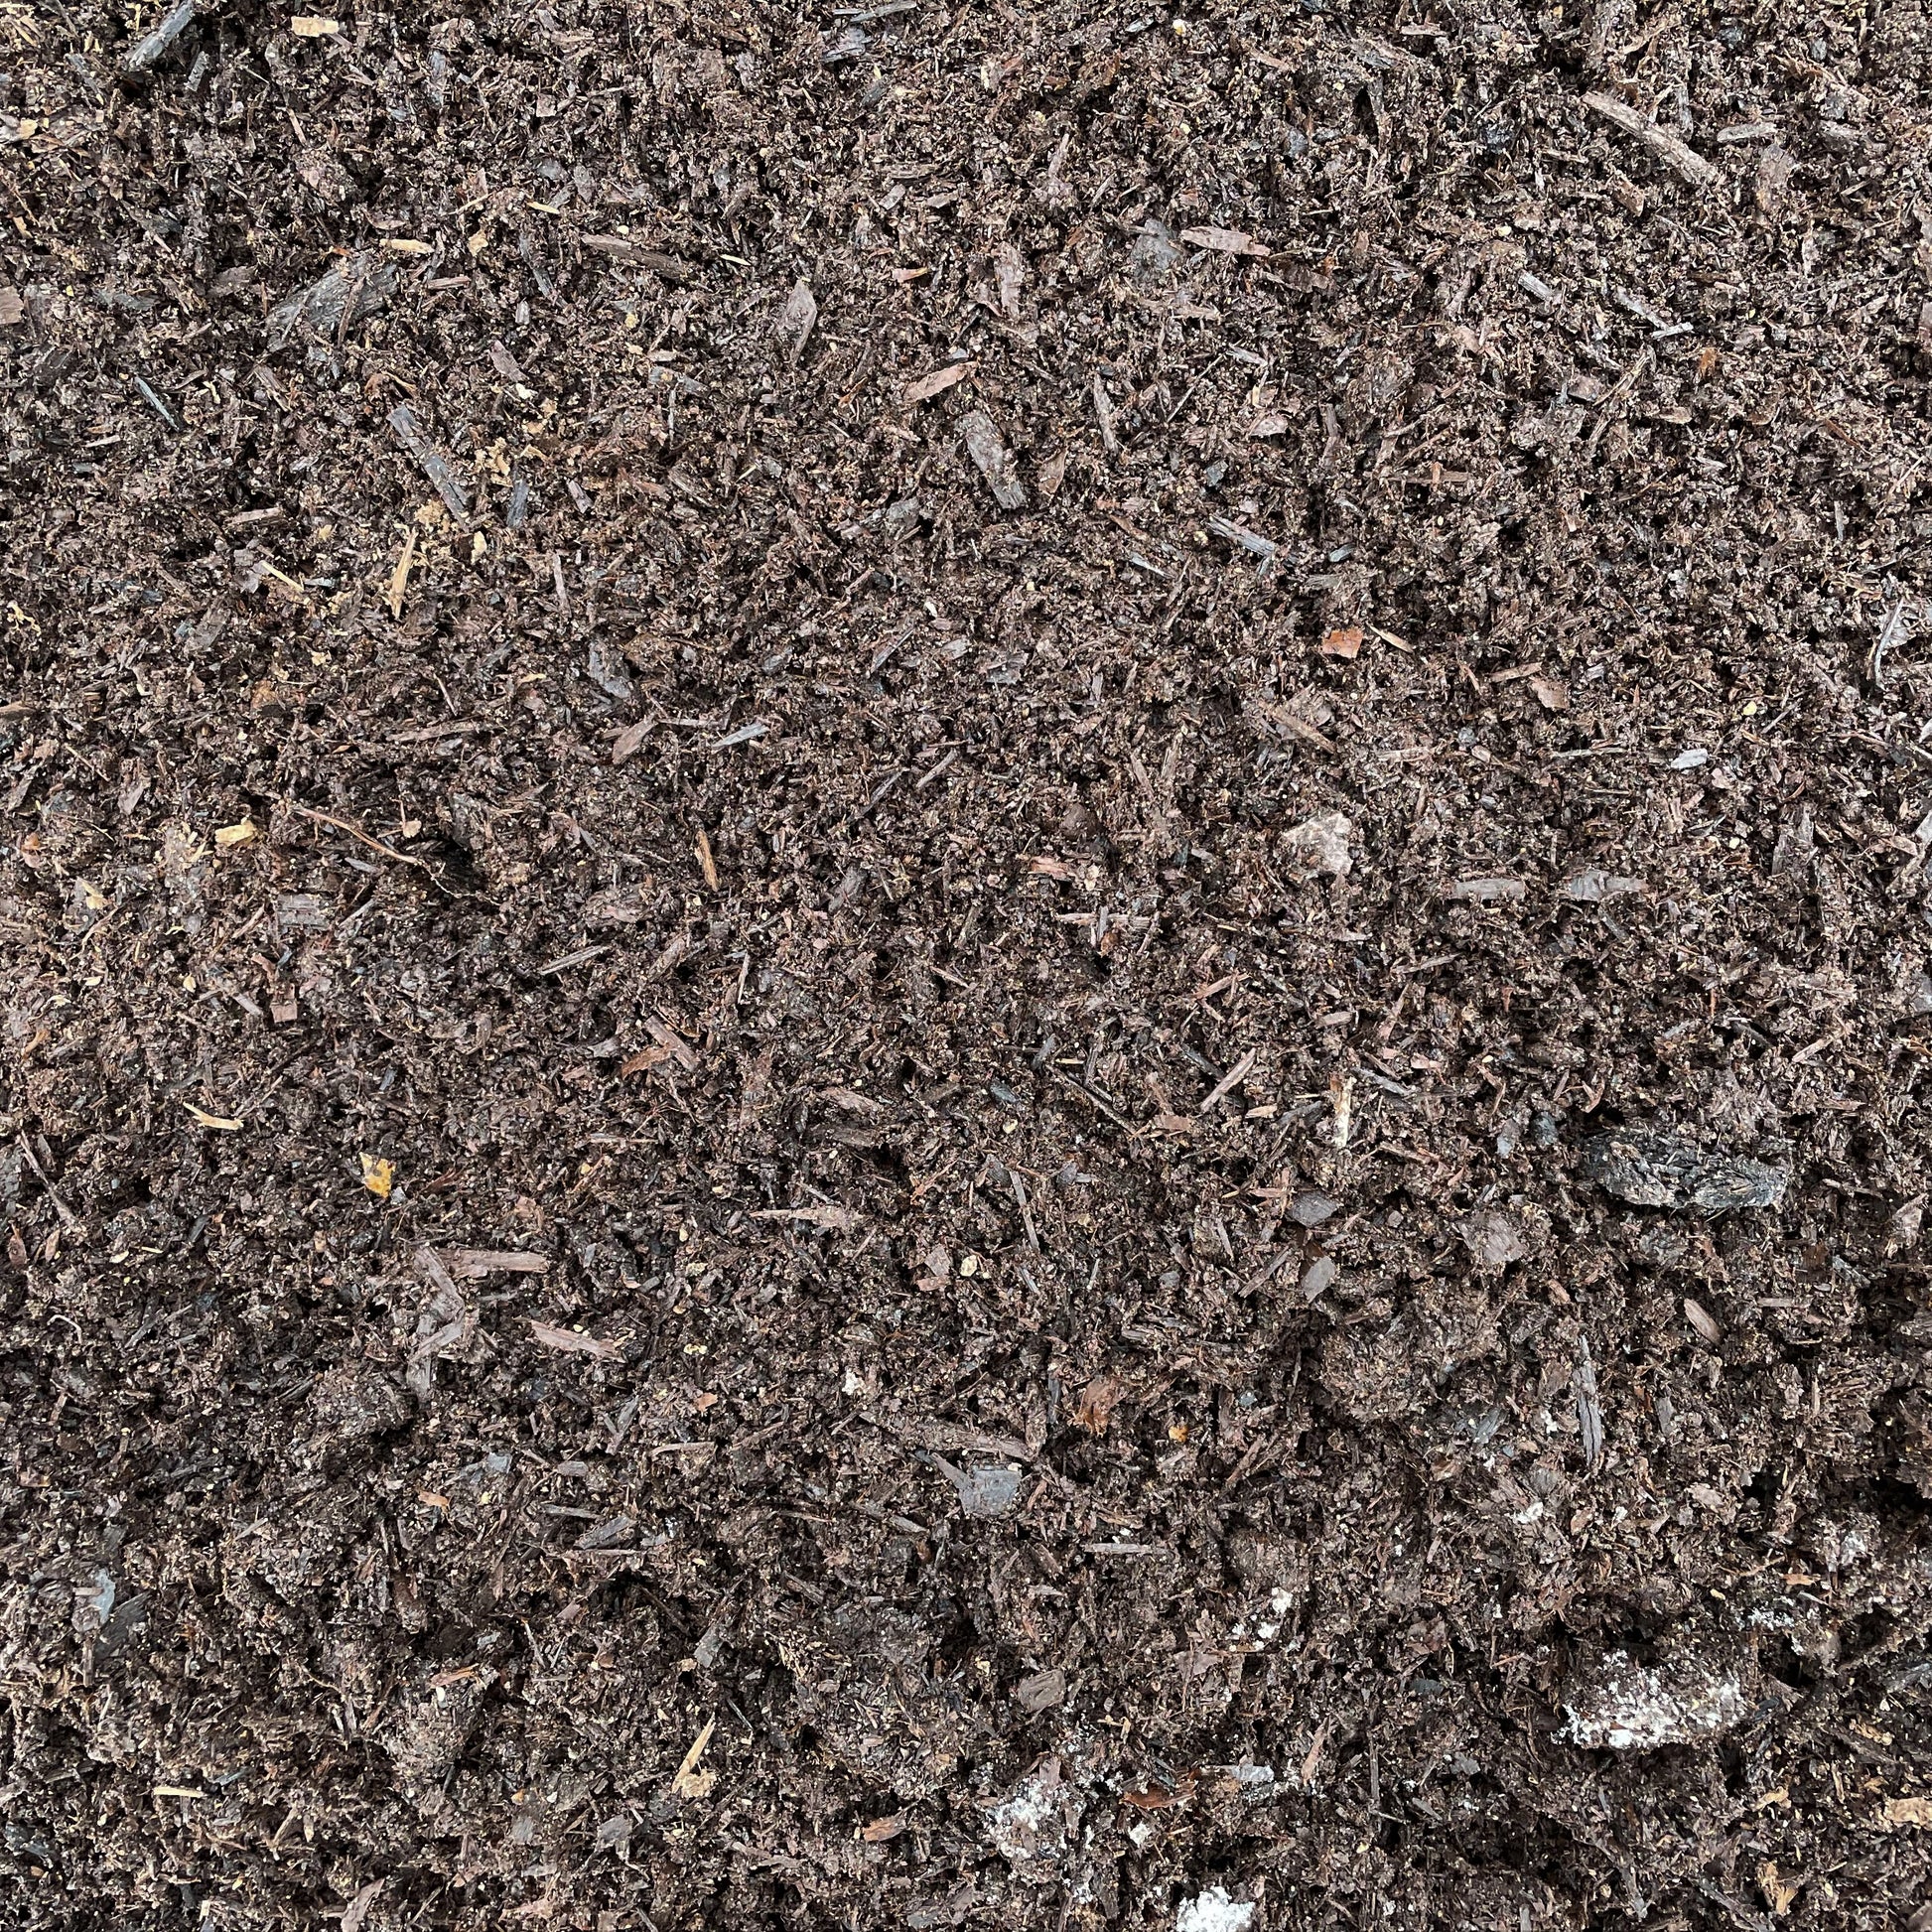 Overhead view of Organic Poultry Compost, a certified organic compost available for delivery from Missoula Dirt Delivery.